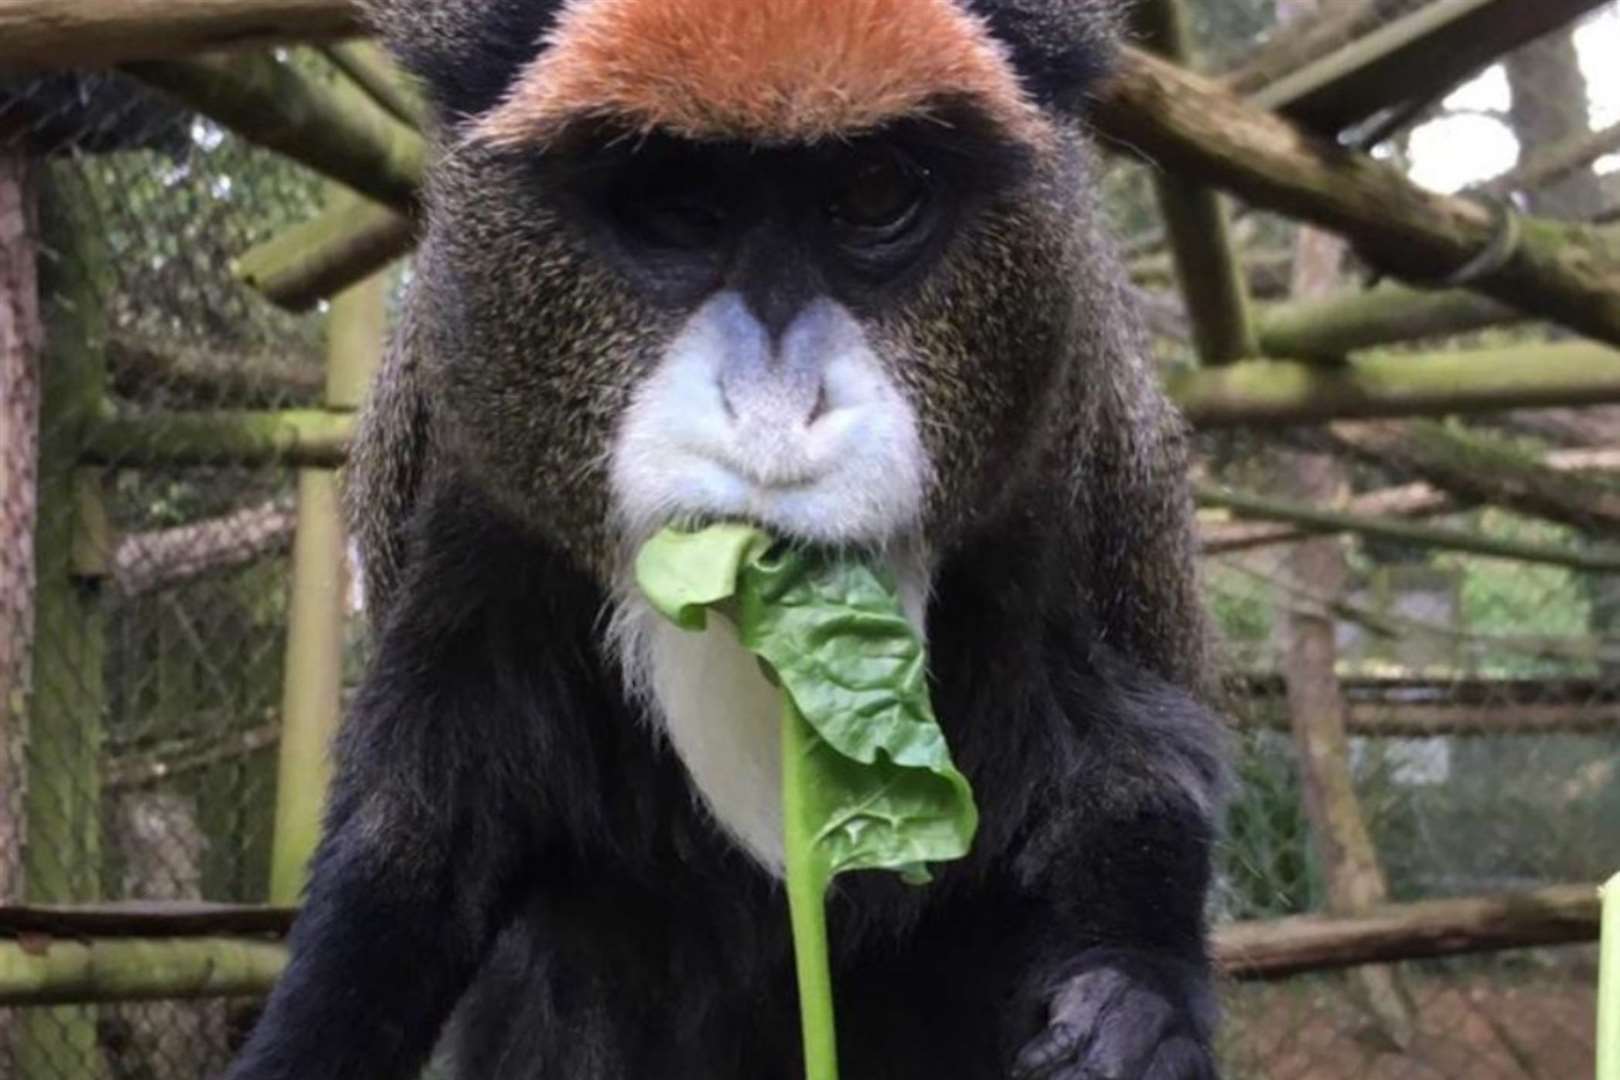 Cabinda the De Brazza monkey has died at Port Lympne in Hythe, aged 36. Photo: Port Lympne